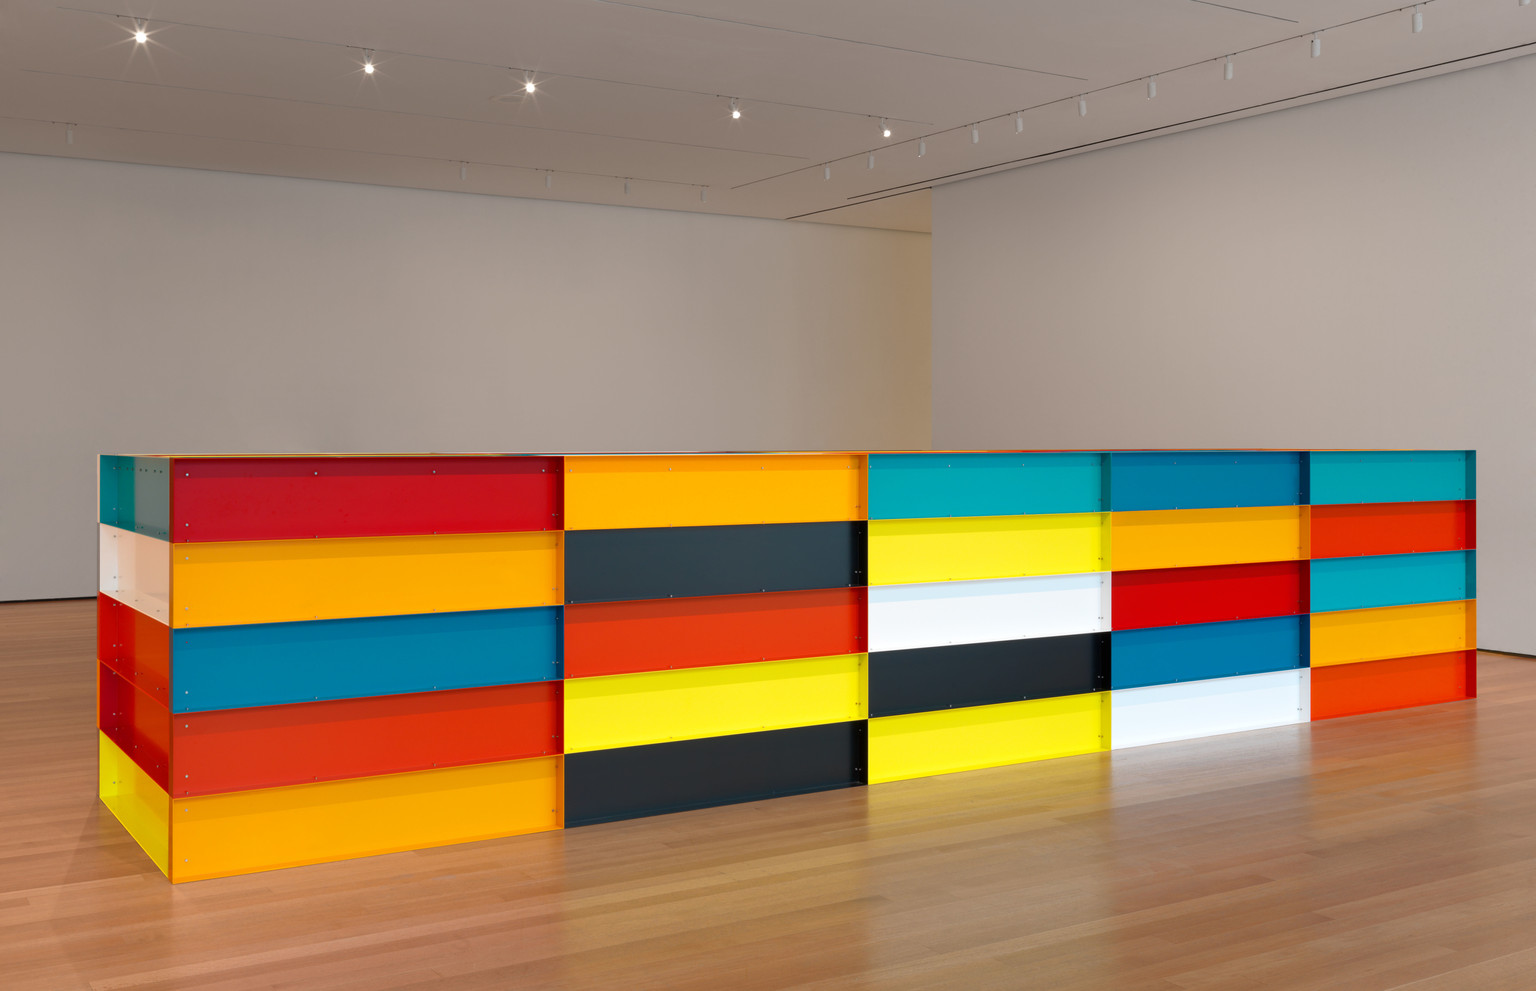 Donald Judd. Untitled.1991. Enameled aluminum. 59" x 24' 7 1/4" x 65" (150 x 750 x 165 cm). The Museum of Modern Art, New York. Bequest of Richard S. Zeisler and gift of Abby Aldrich Rockefeller (both by exchange) and gift of Kathy Fuld, Agnes Gund, Patricia Cisneros, Doris Fisher, Mimi Haas, Marie-Josée and Henry R. Kravis, and Emily Spiegel Page. © 2020 Judd Foundation / Artists Rights Society (ARS), New York